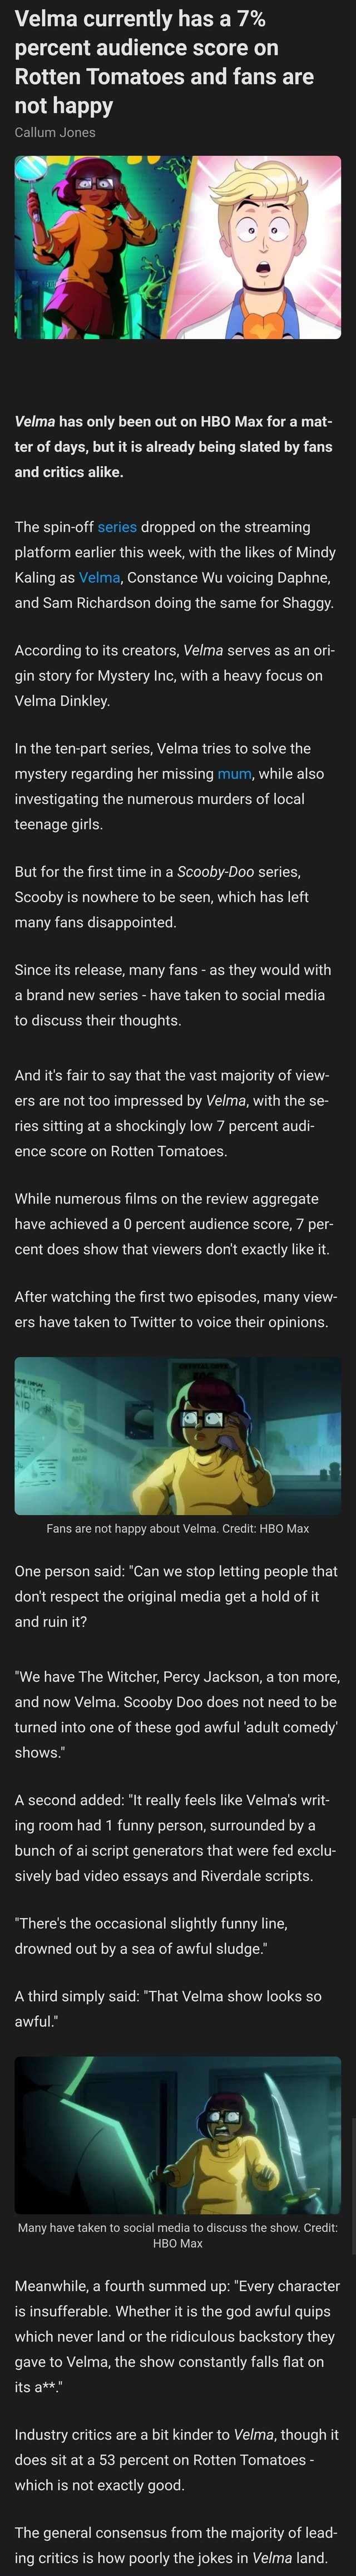 TOTAL DISASTER! WOKE VELMA Gets DESTROYED On Rotten Tomatoes With A 12%  Audience Score!?!? 